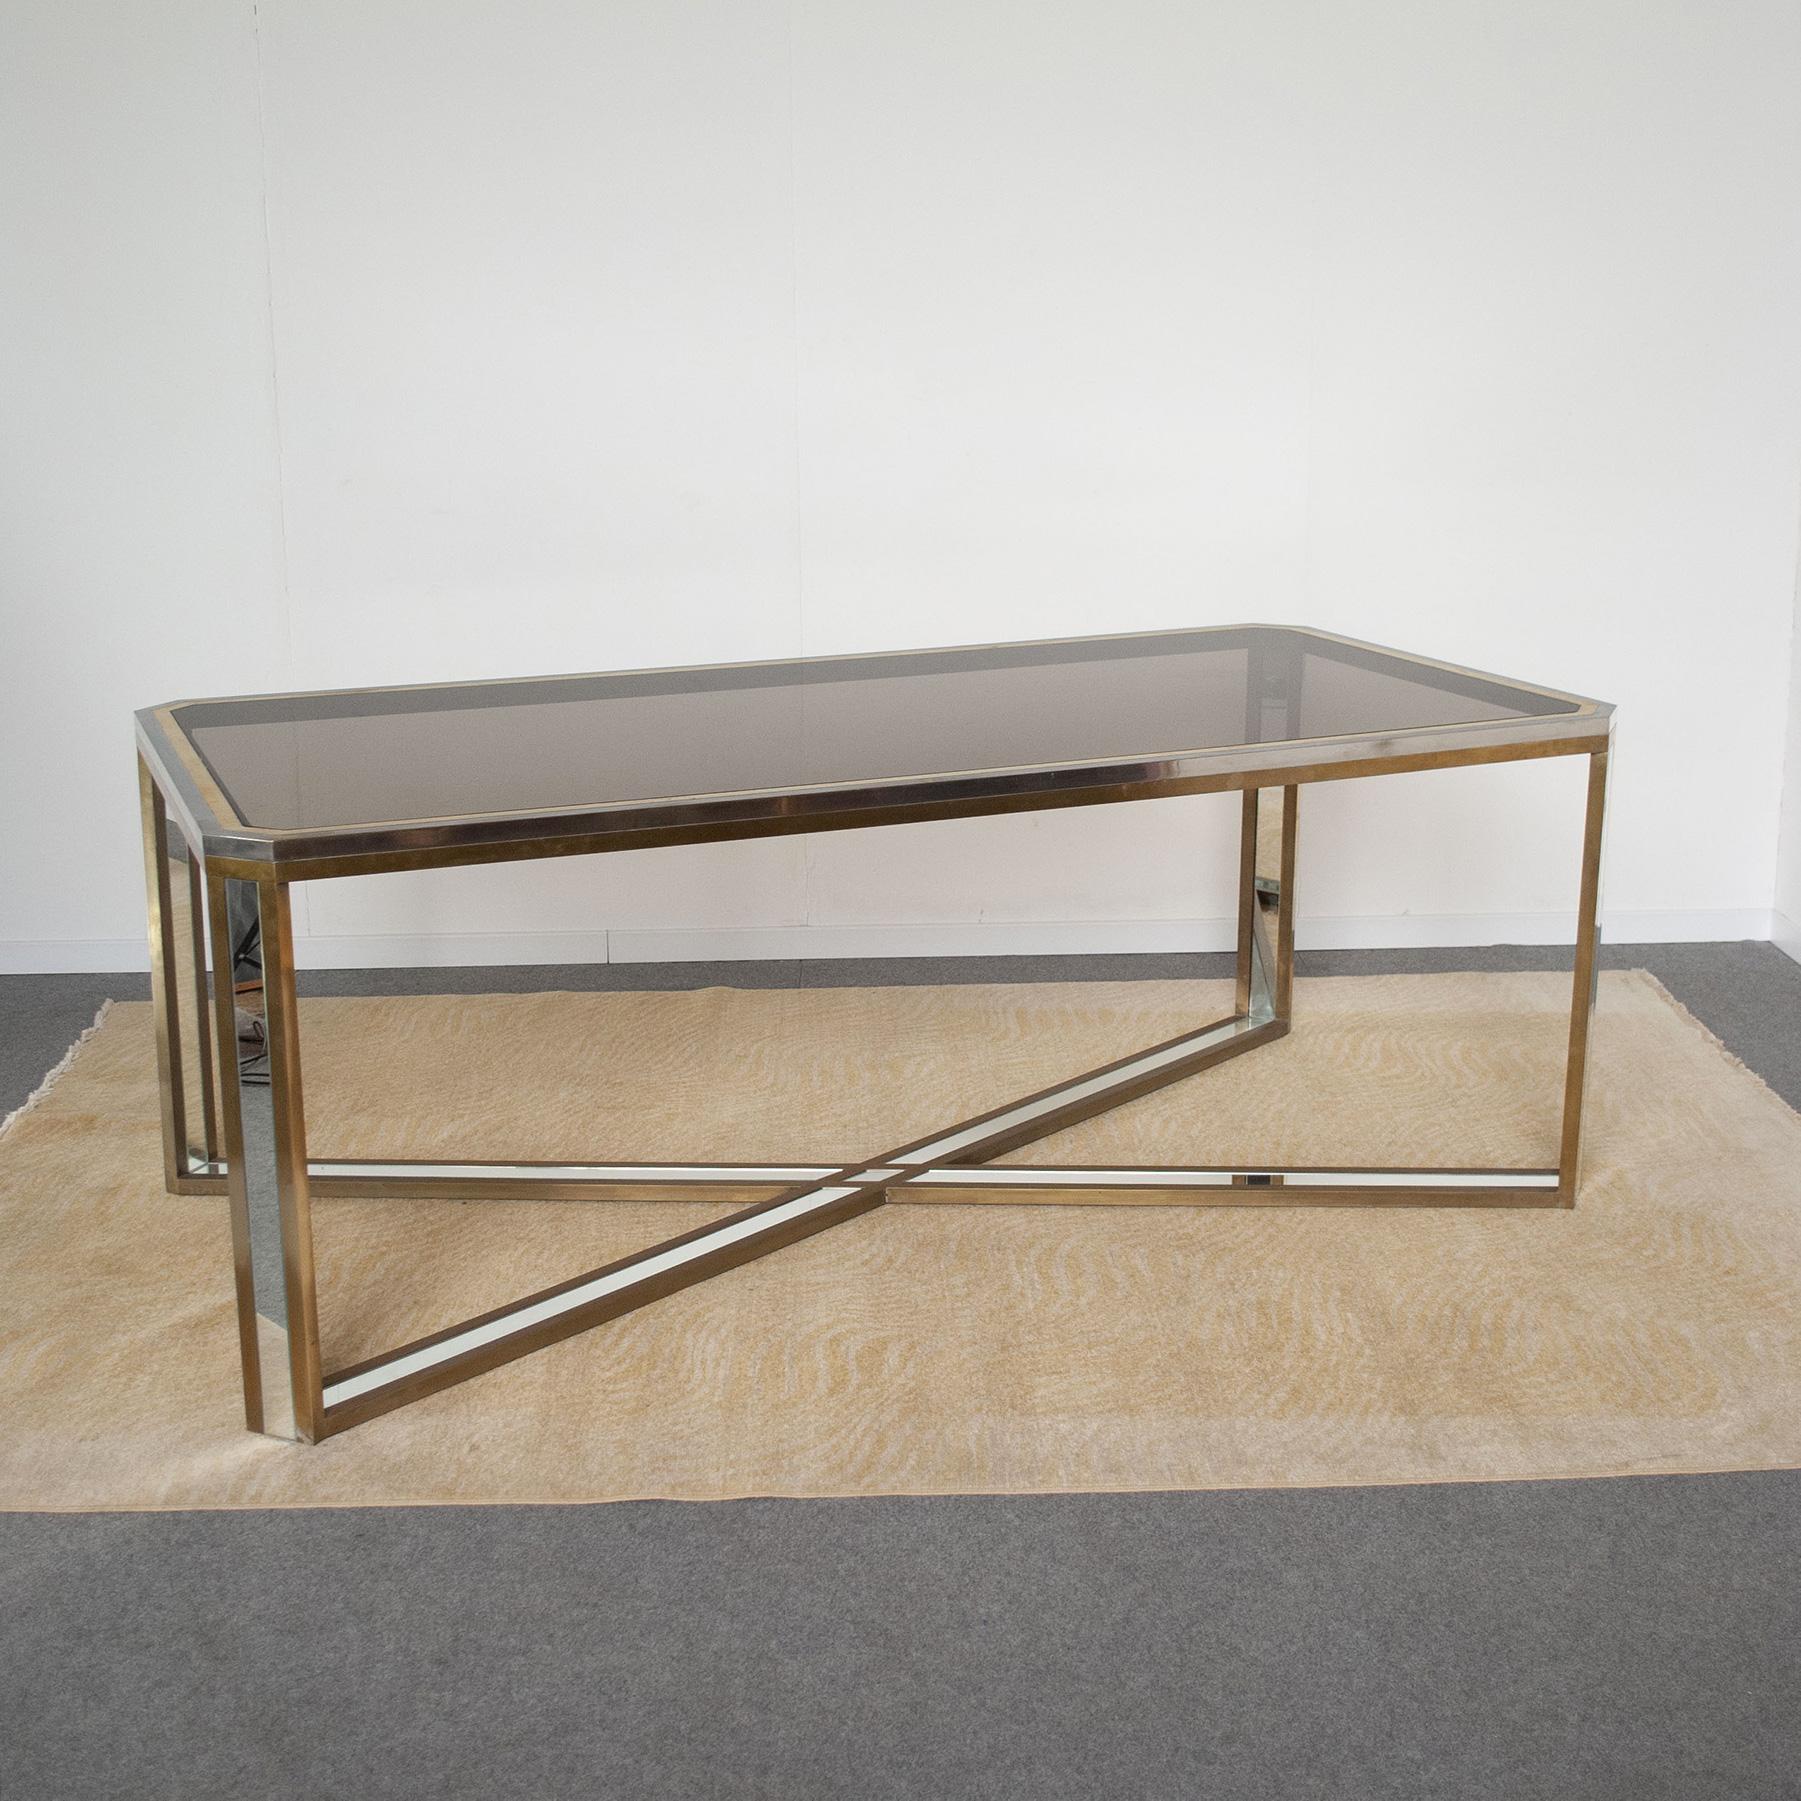 Romeo Rega 1970s Italian Midcentury Table in Stainless Steel, brass and Mirror For Sale 9